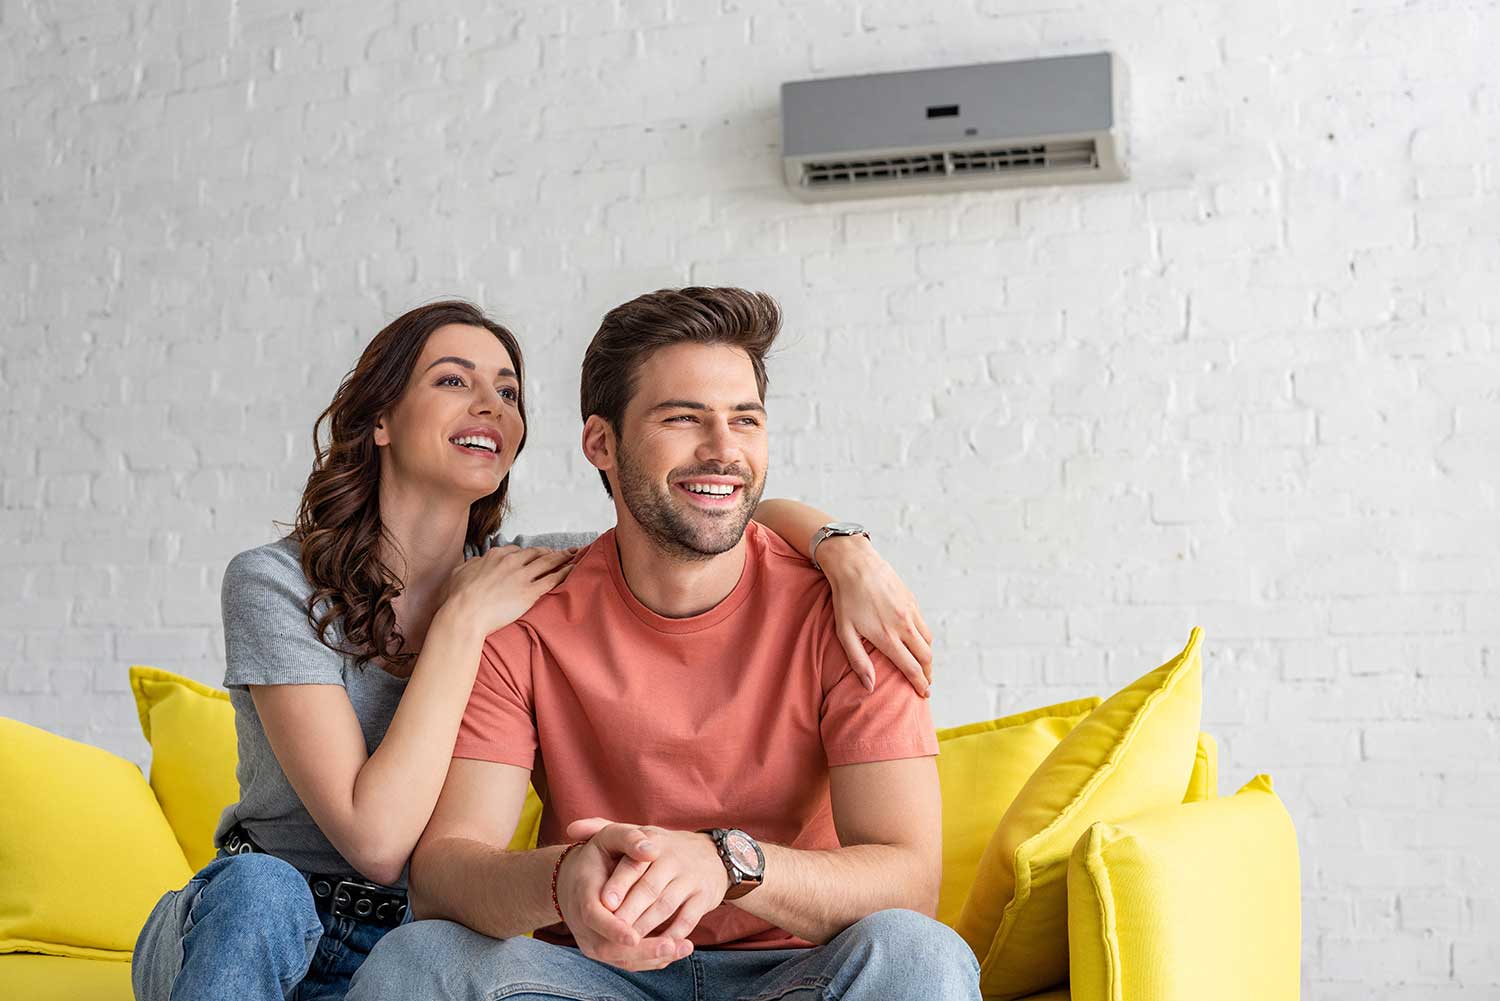 The best way to save money on heating and AC bills